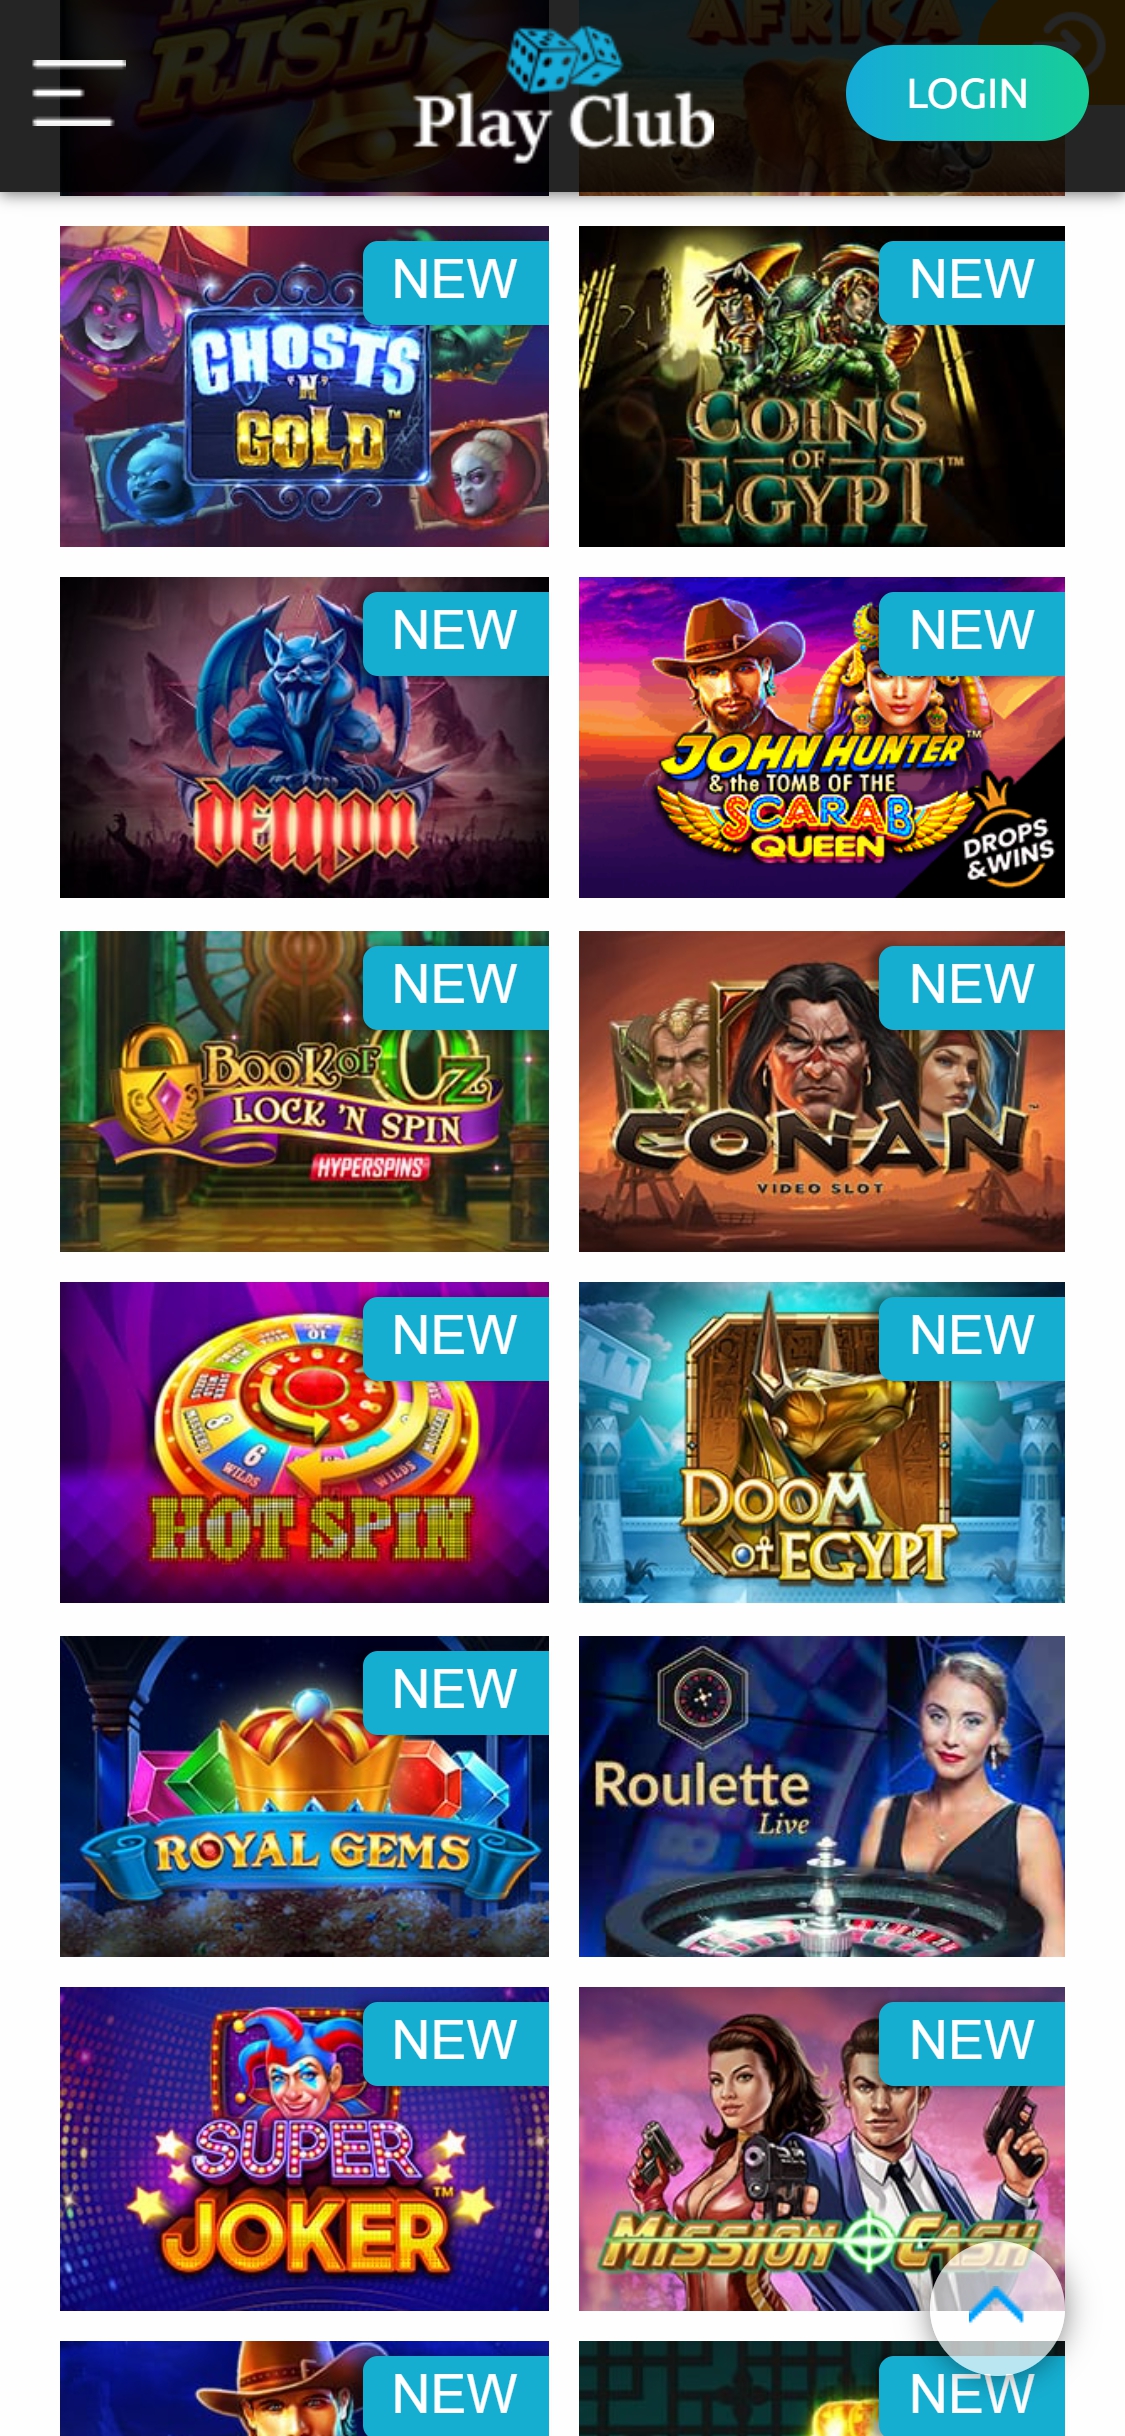 Play Club Casino Mobile Games Review